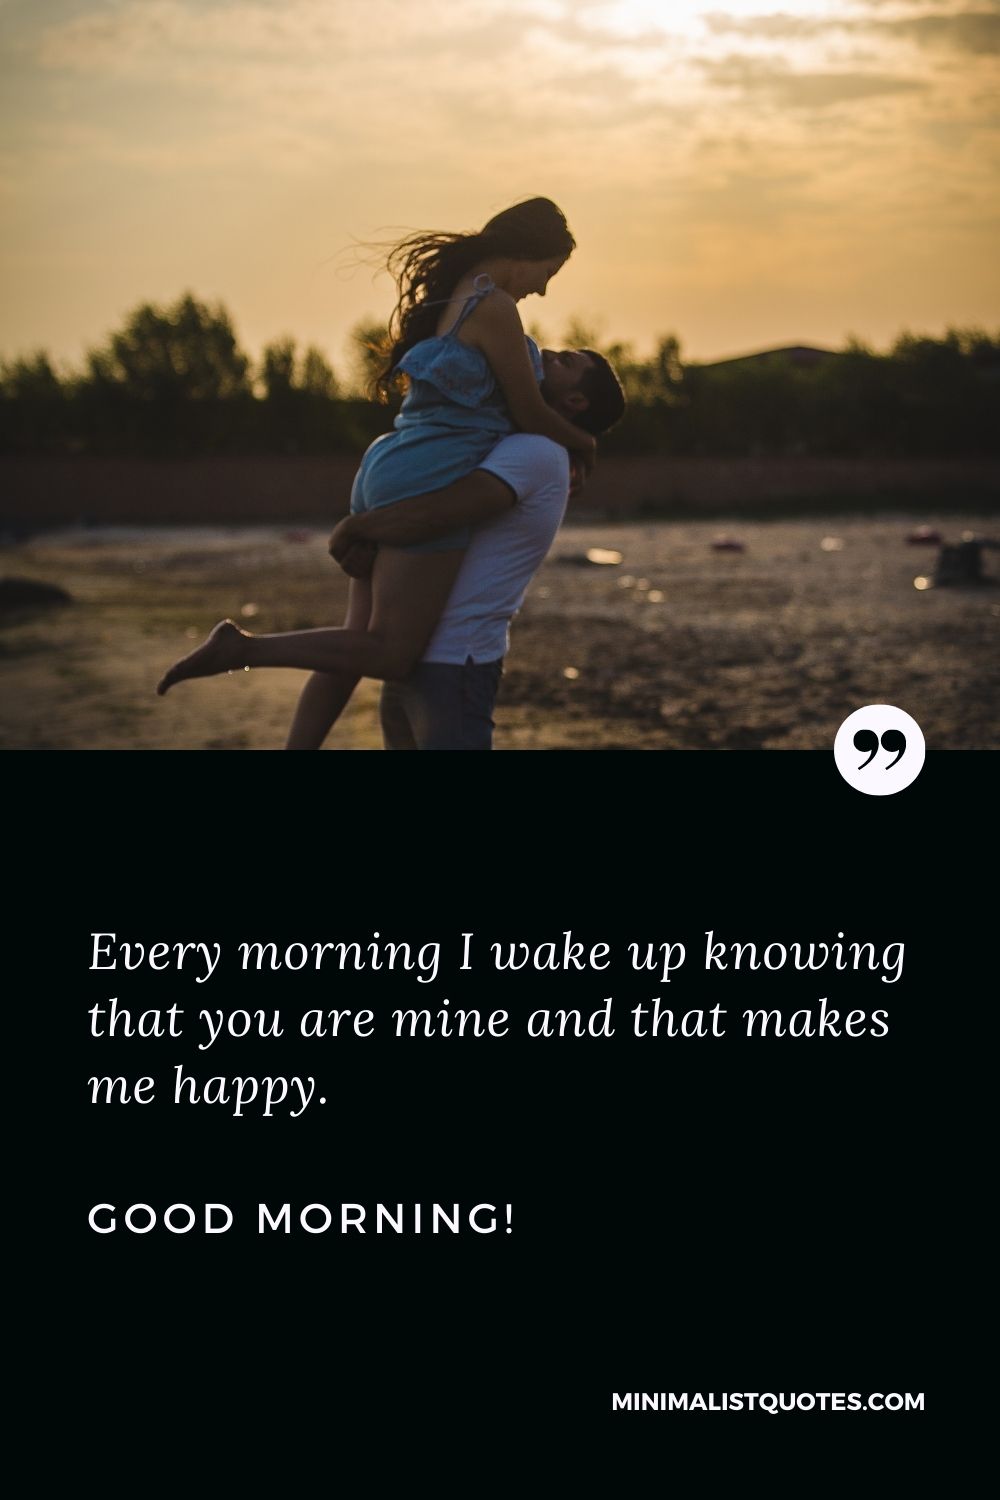 Sweet morning message: Every morning I wake up knowing that you are mine and that makes me happy. Good Morning!